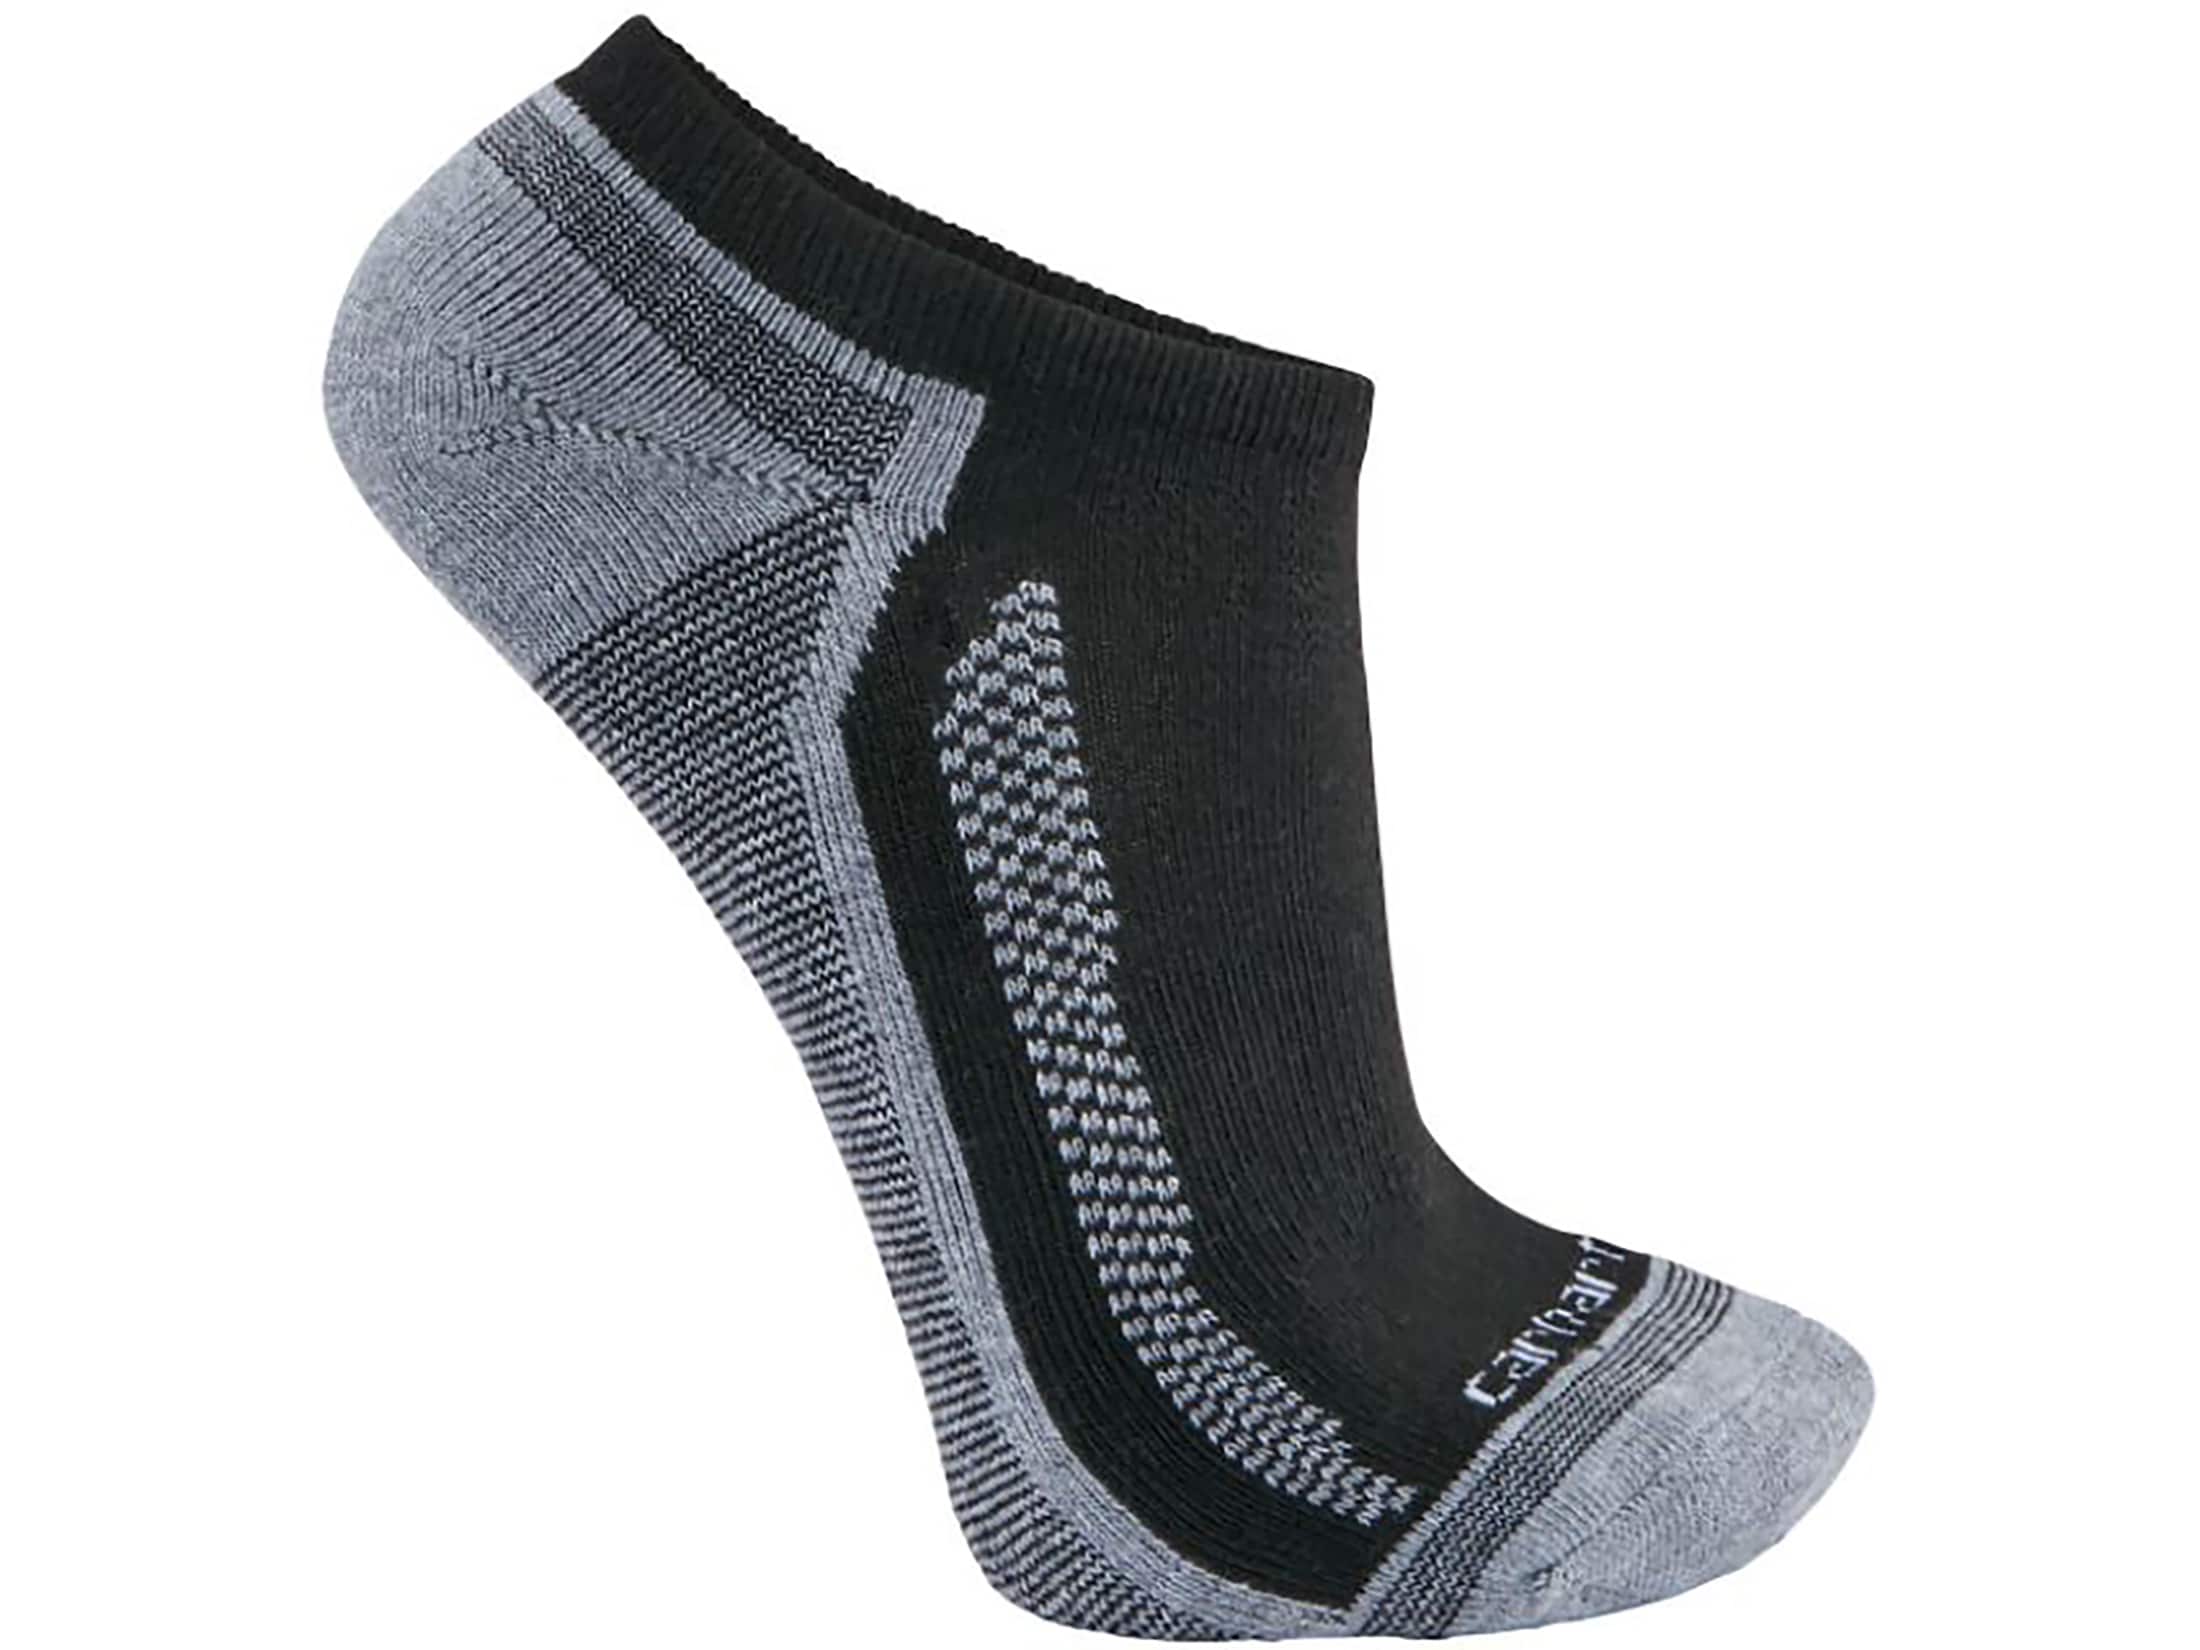 Carhartt Men's Force Midweight Low Cut Socks Charcoal Large 3 Pack